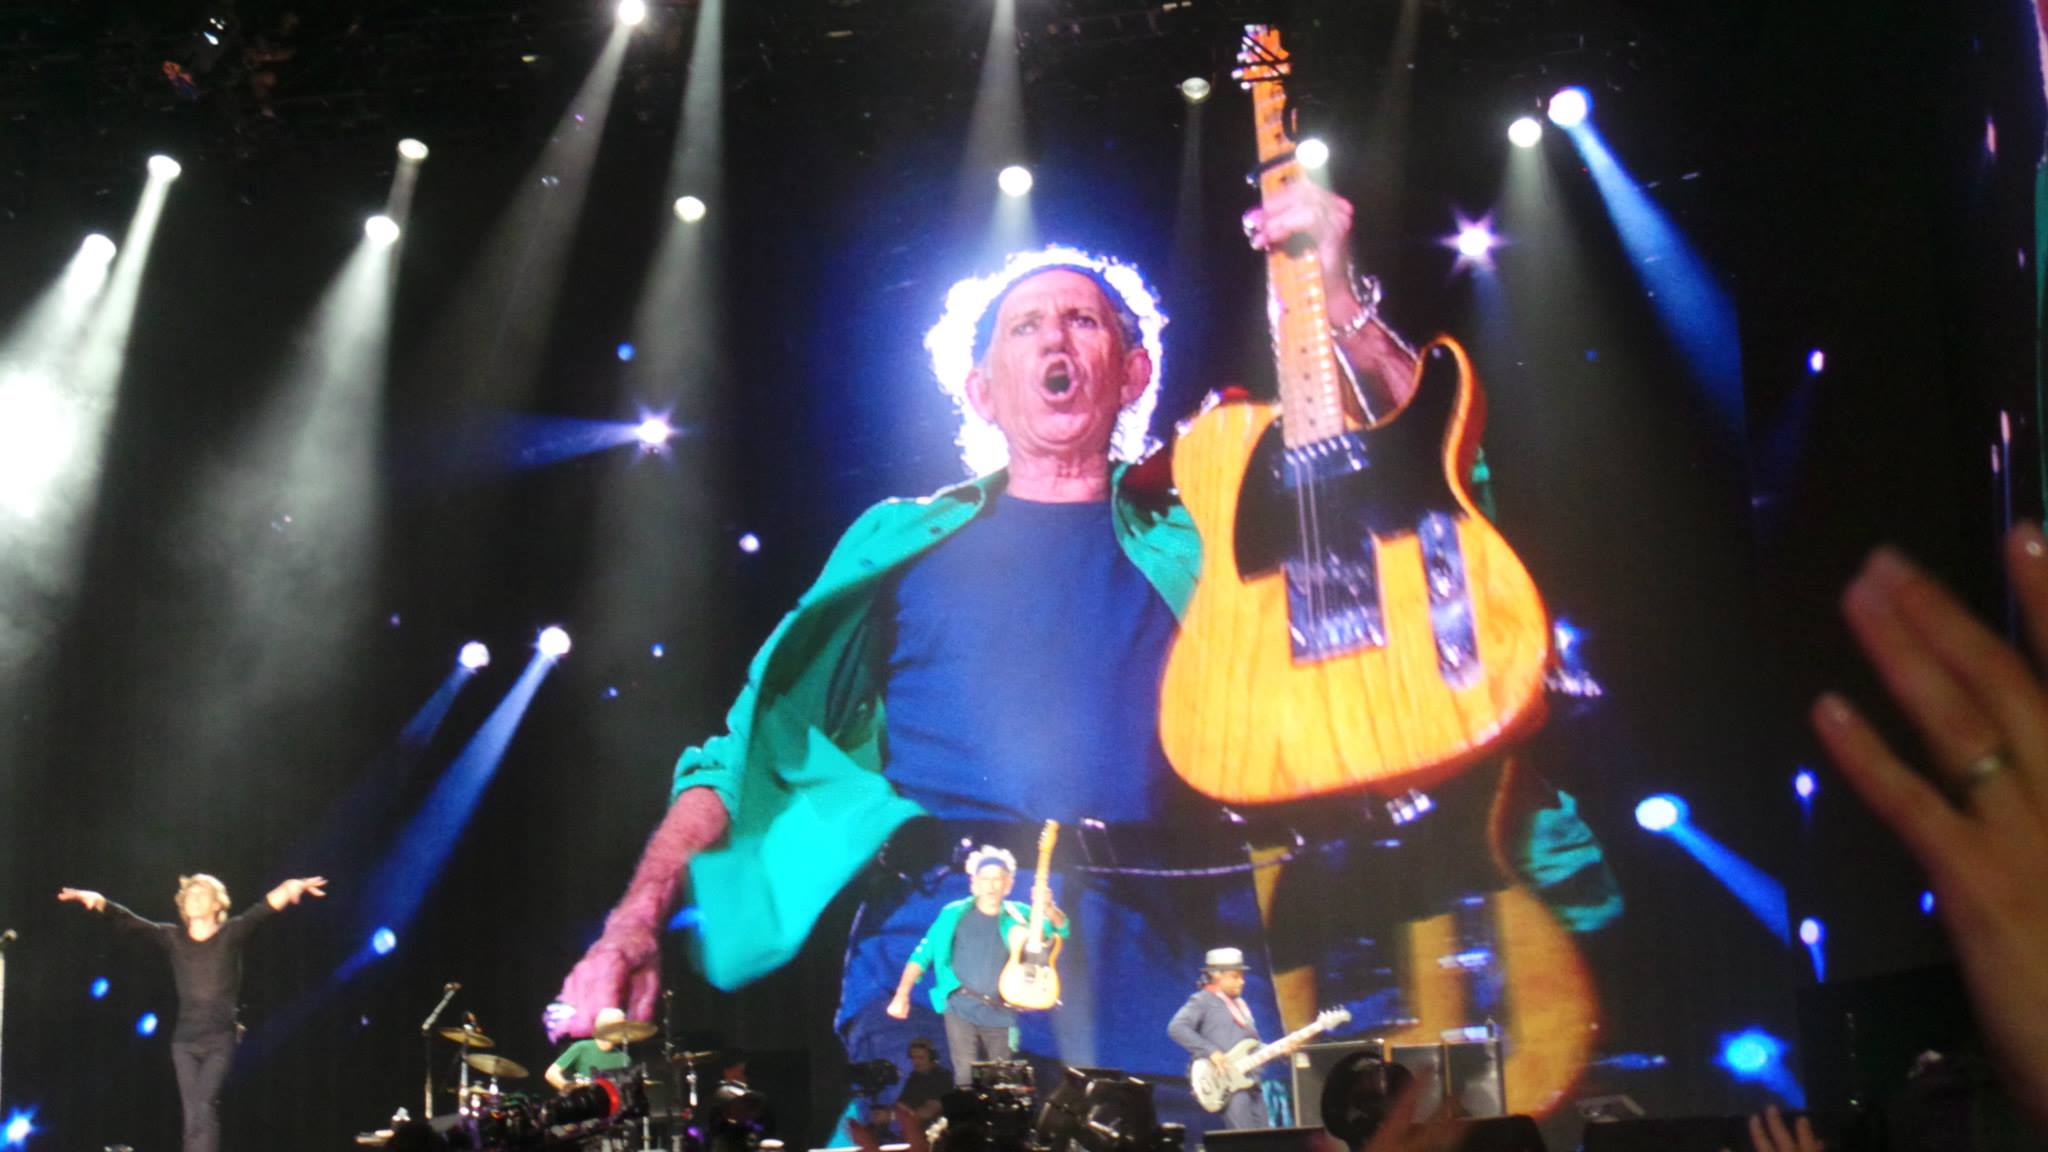 Keith Richards at Hyde Park, London, 13 July 2013. Photo courtesy of Jaz Townsend